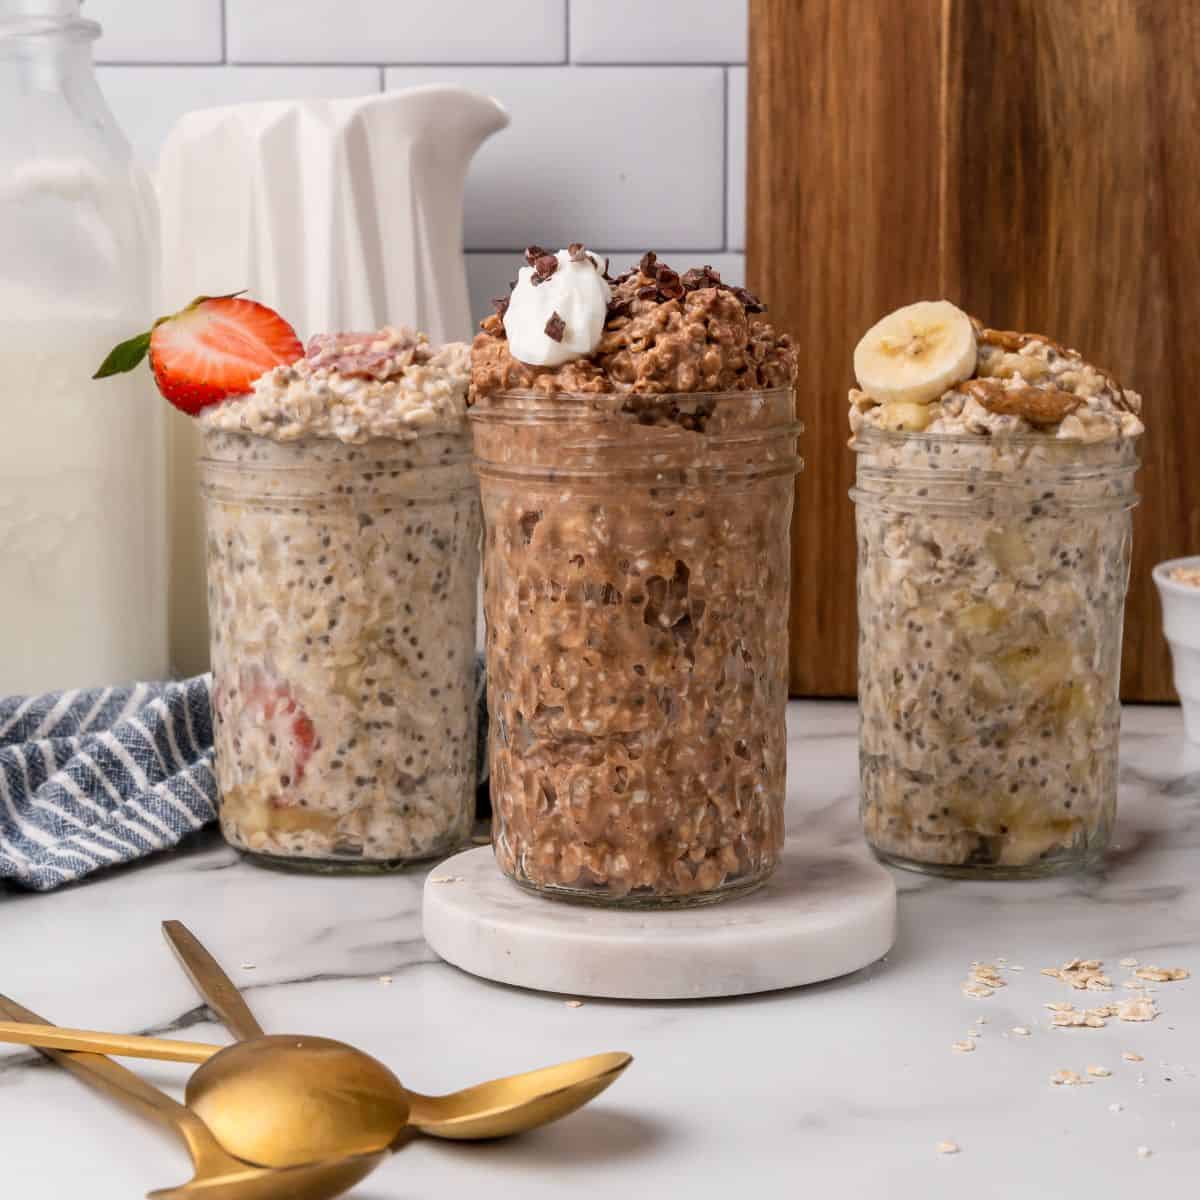 weight loss overnight oats. Three jars next to each other.